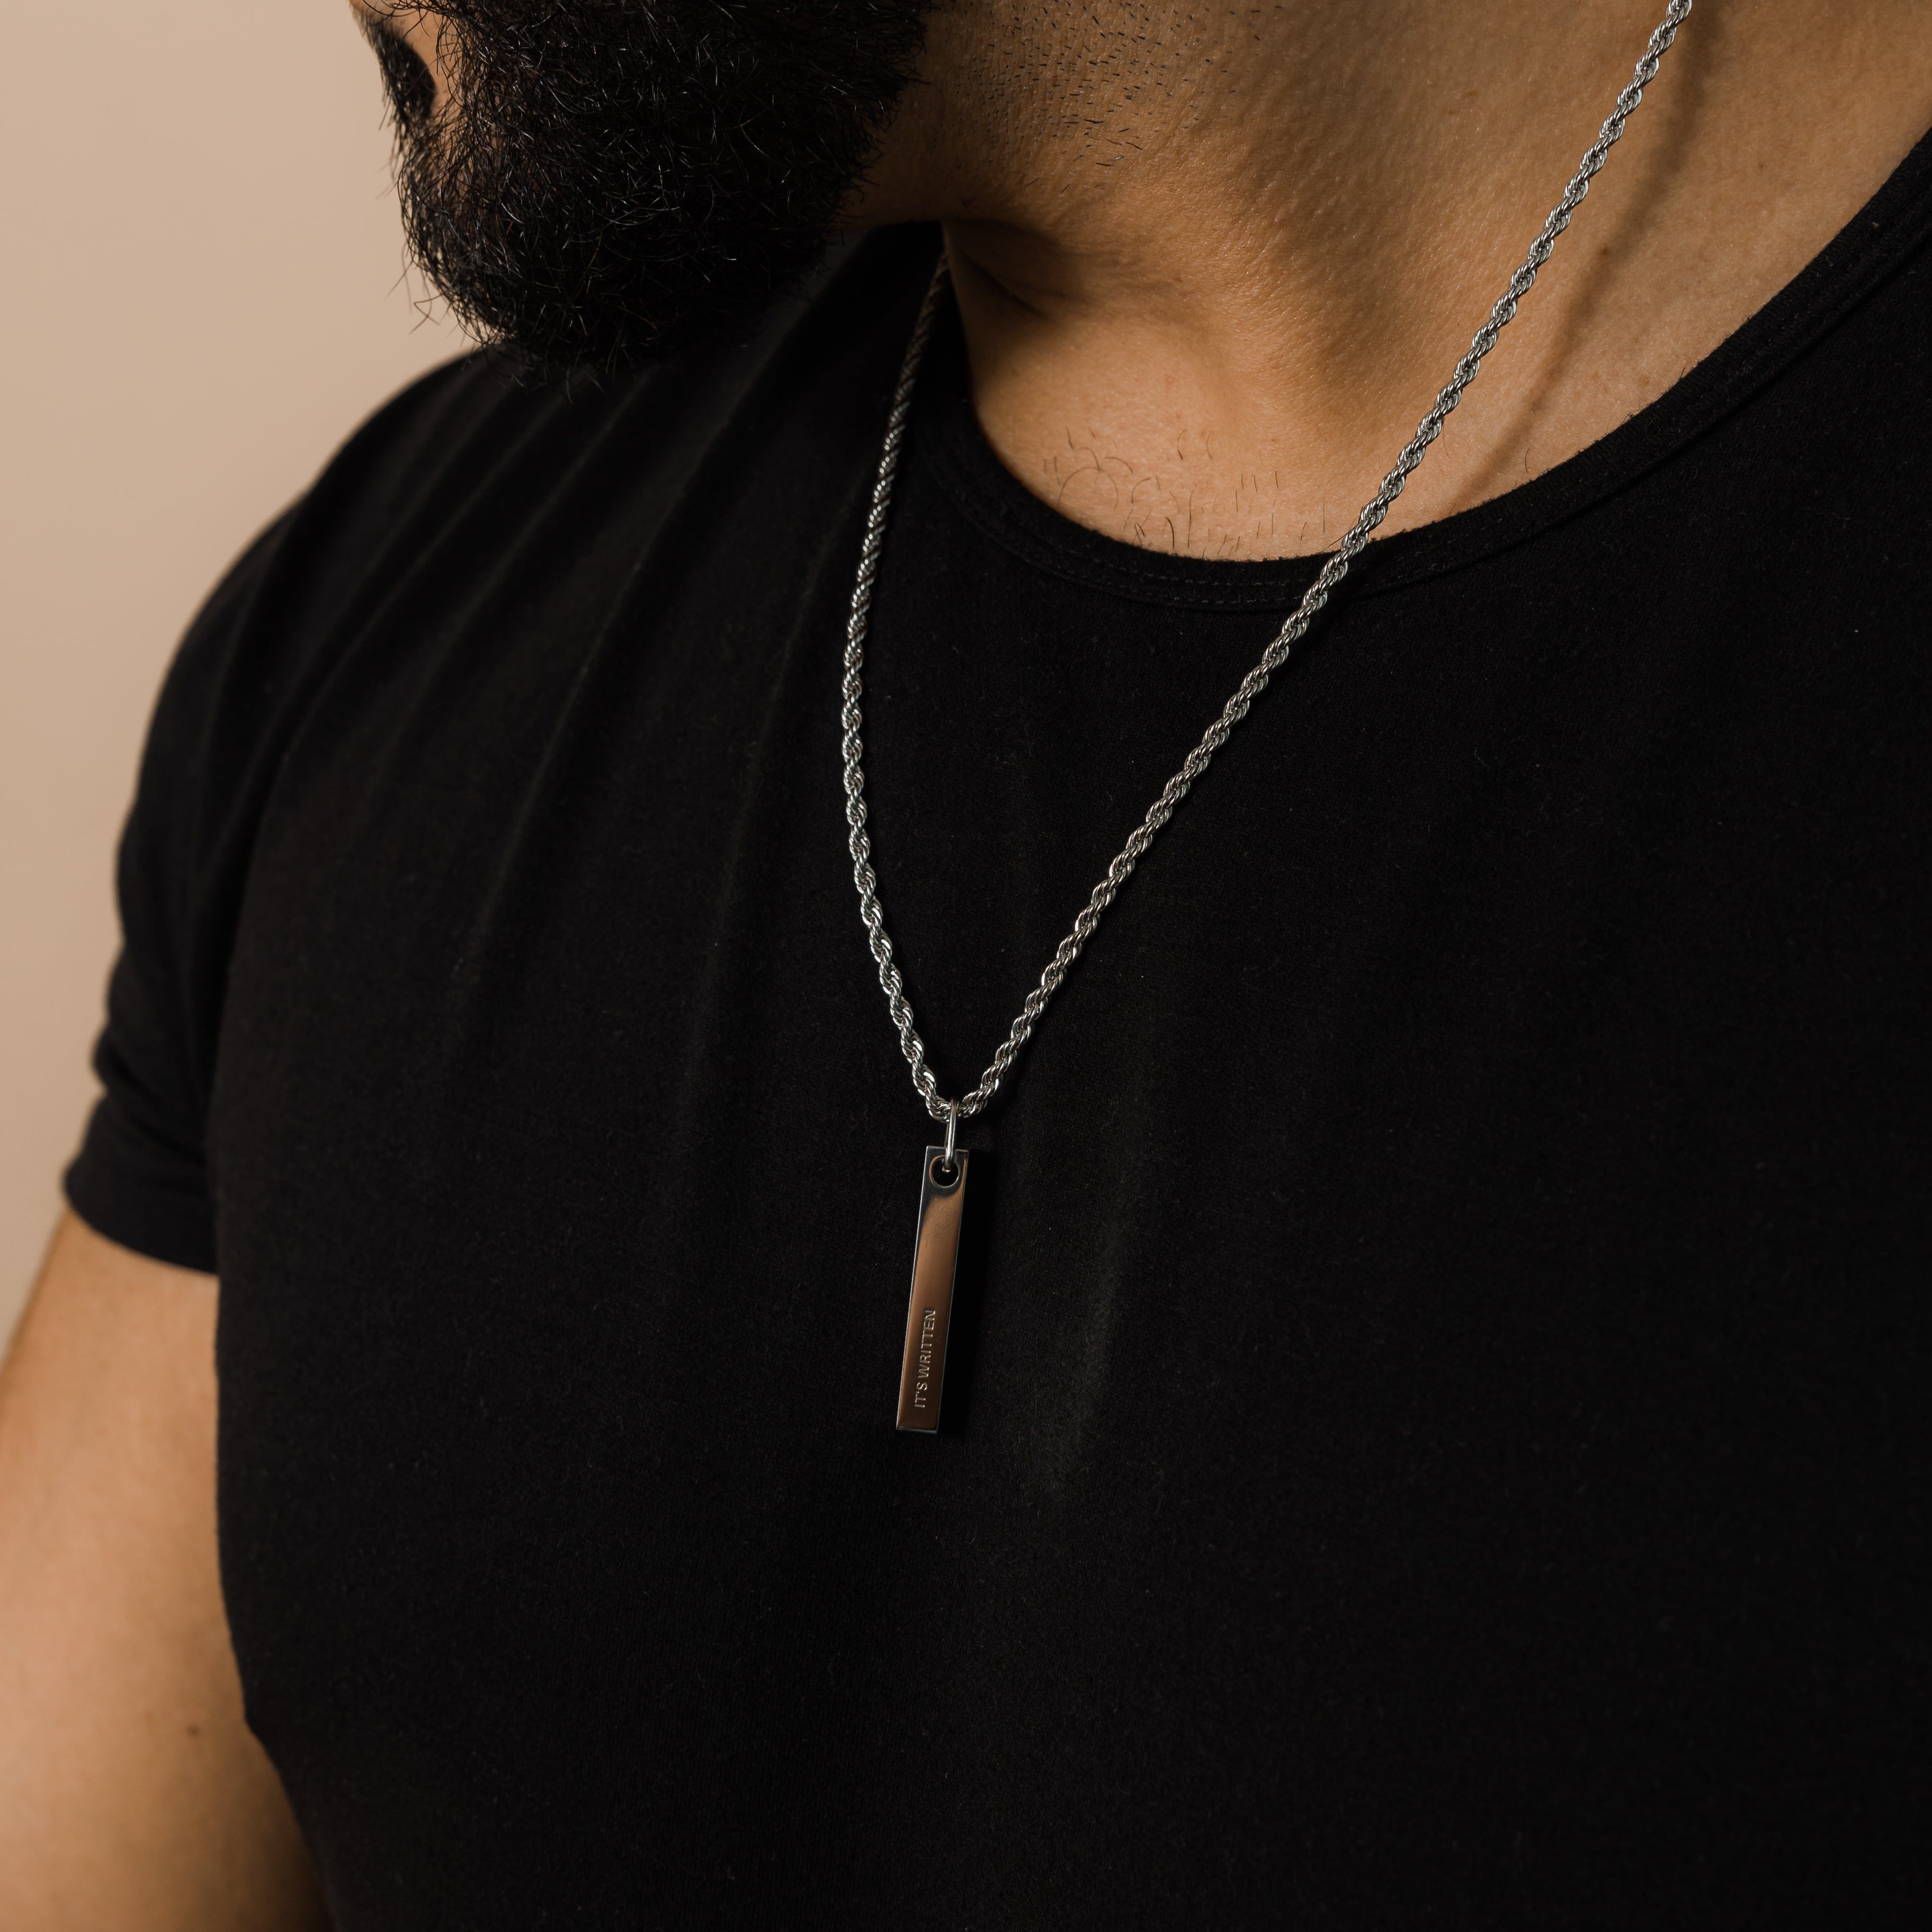 Buy Personalized Bar Necklace for Men/ Father's Day Gift / Family Necklace  / Valentine's Day Gift for Him Online in India - Etsy